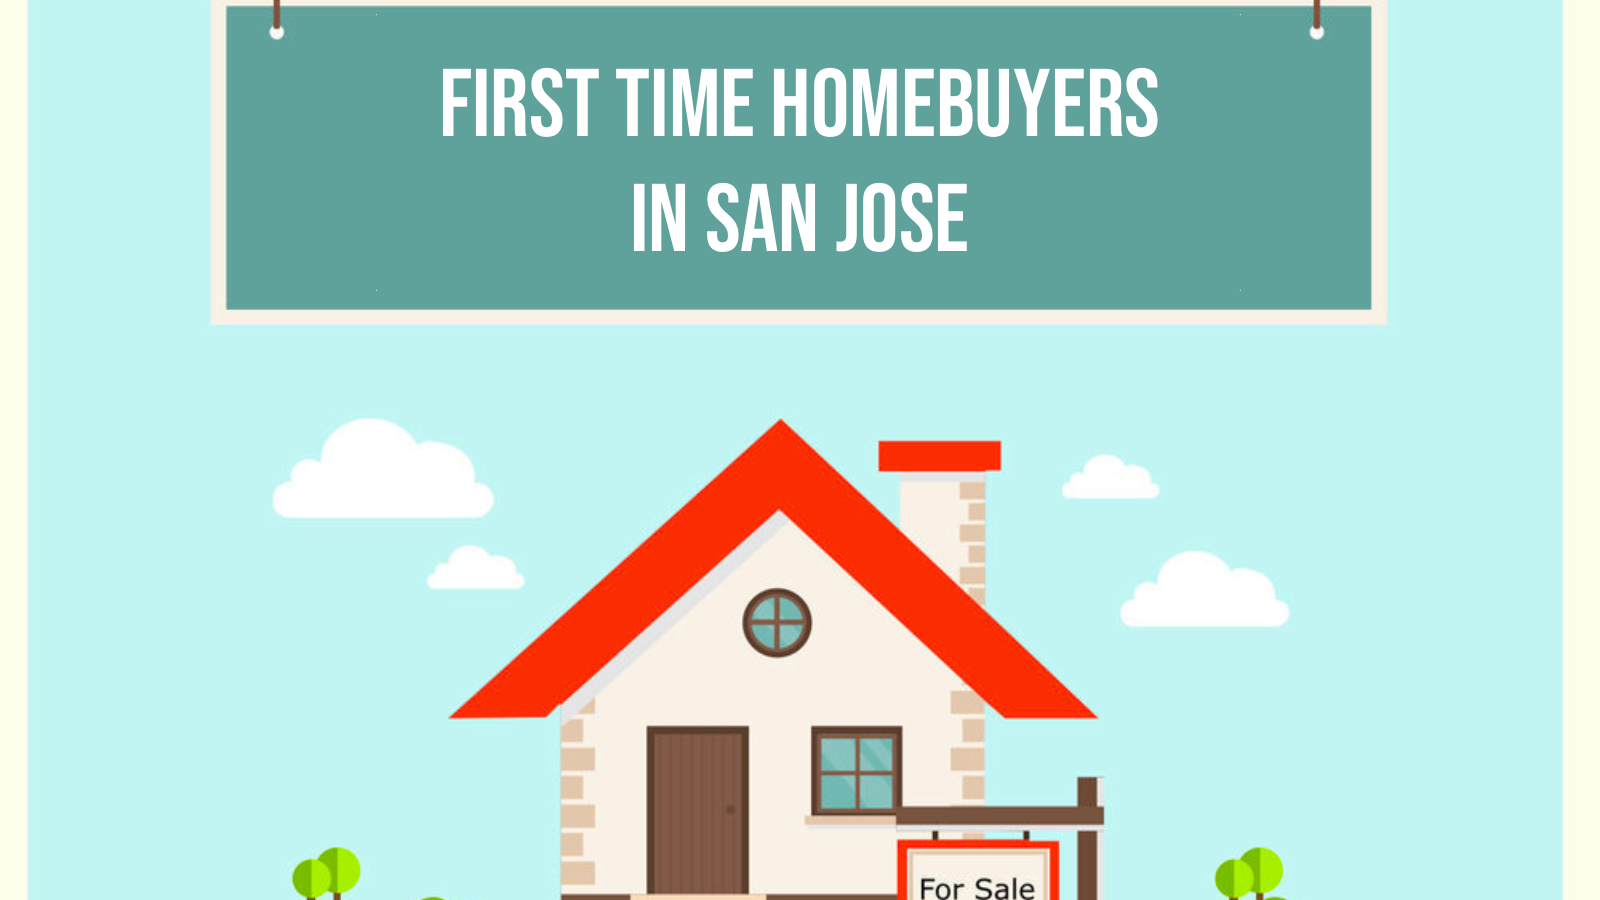 First Time Homebuyers in San Jose